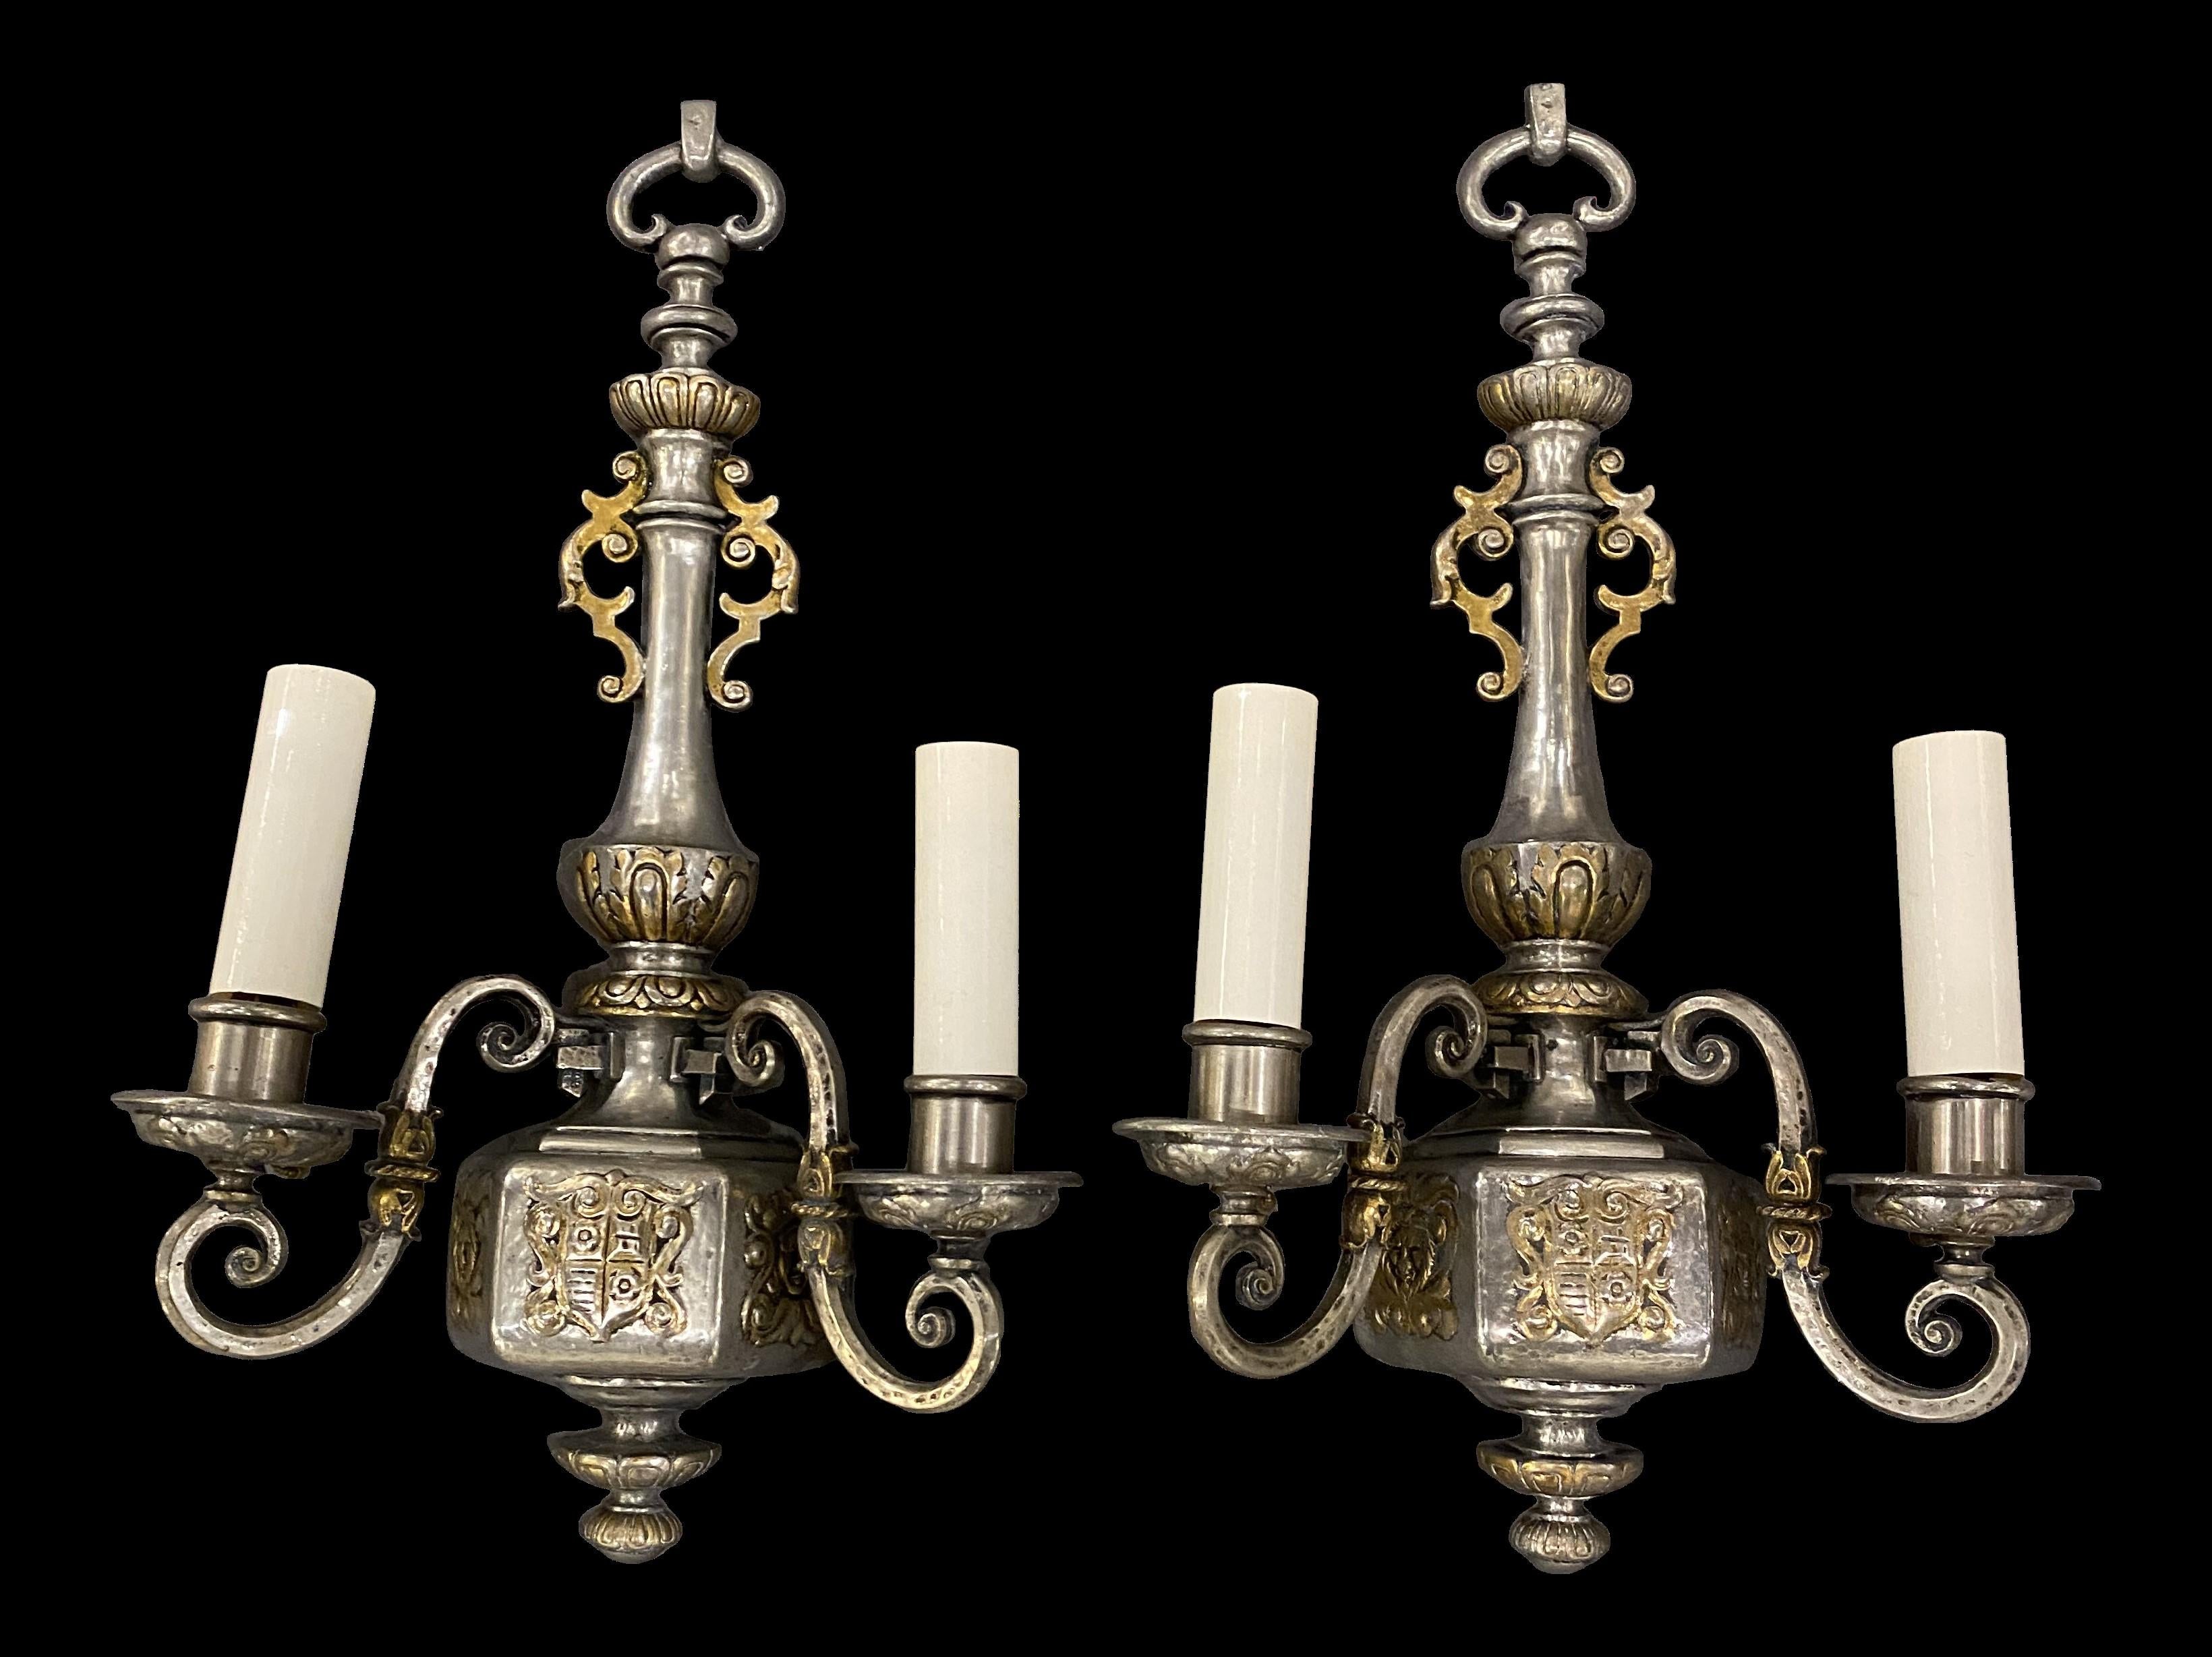 A pair of circa 1920's Caldwell silver plated double light sconces with gilt details